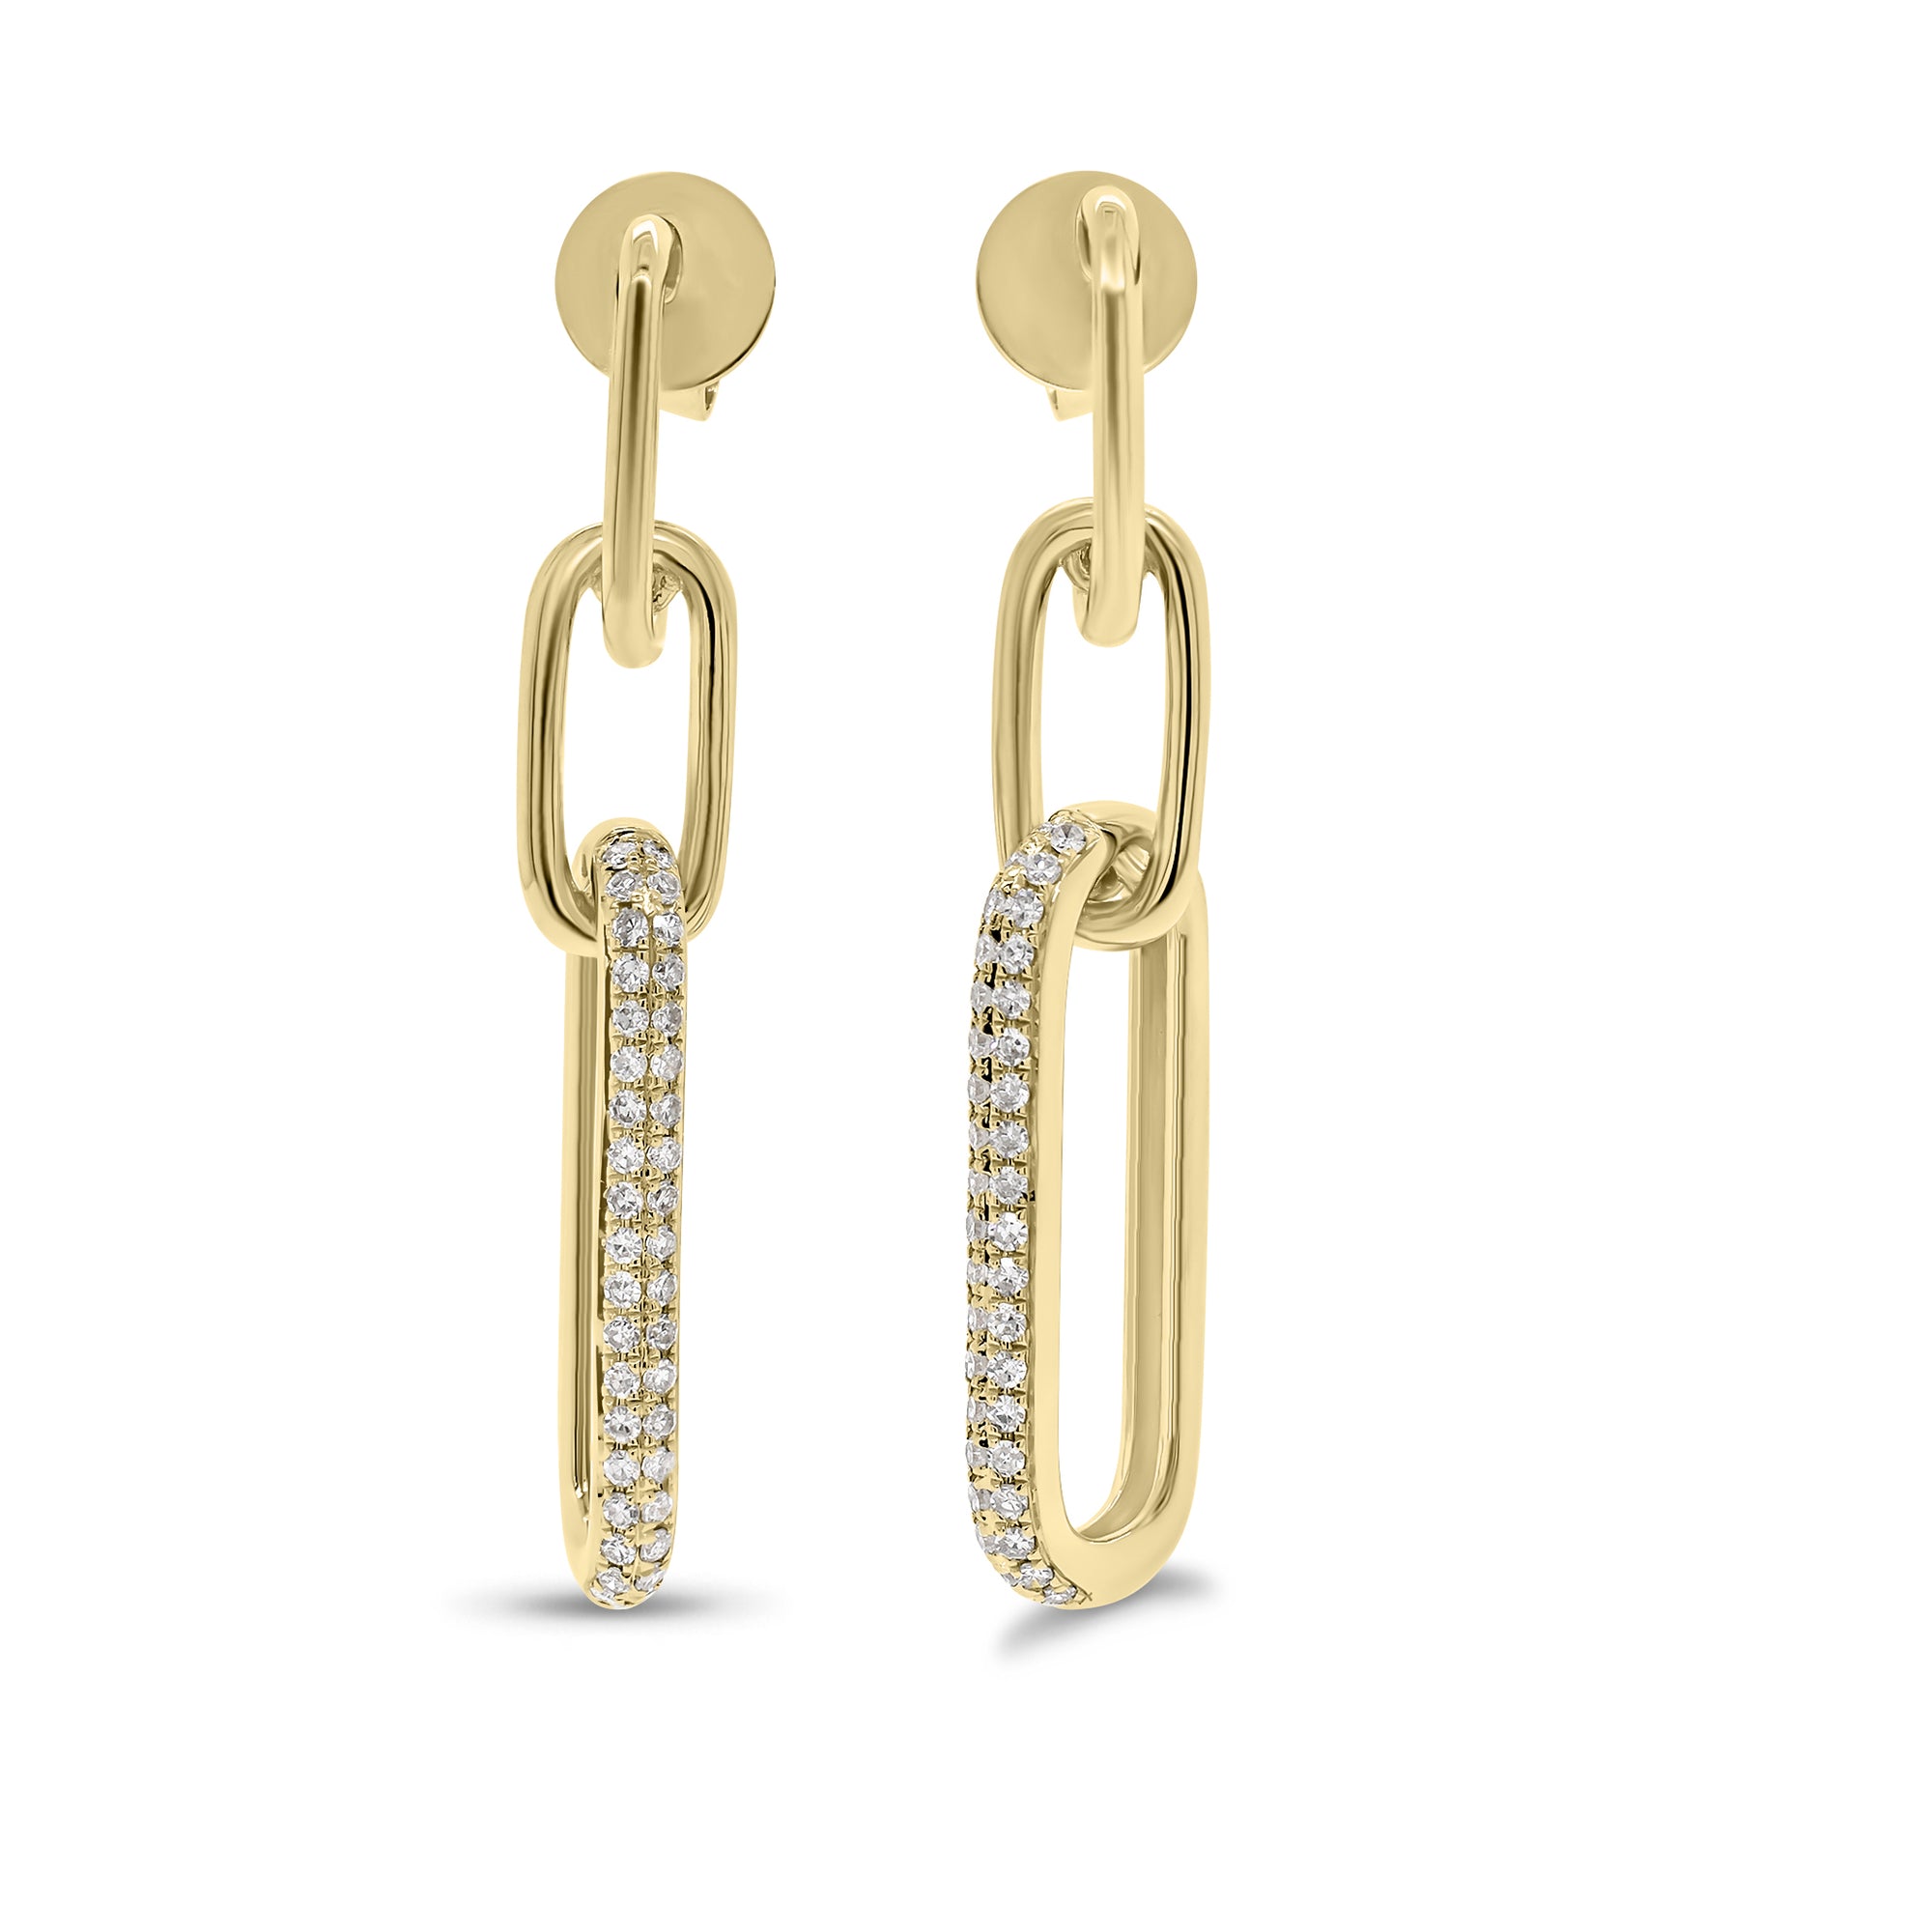 Diamond Paperclip Chain Dangle Earrings - 14K gold weighing 4.58 grams  - 76 round diamonds weighing 0.27 carats